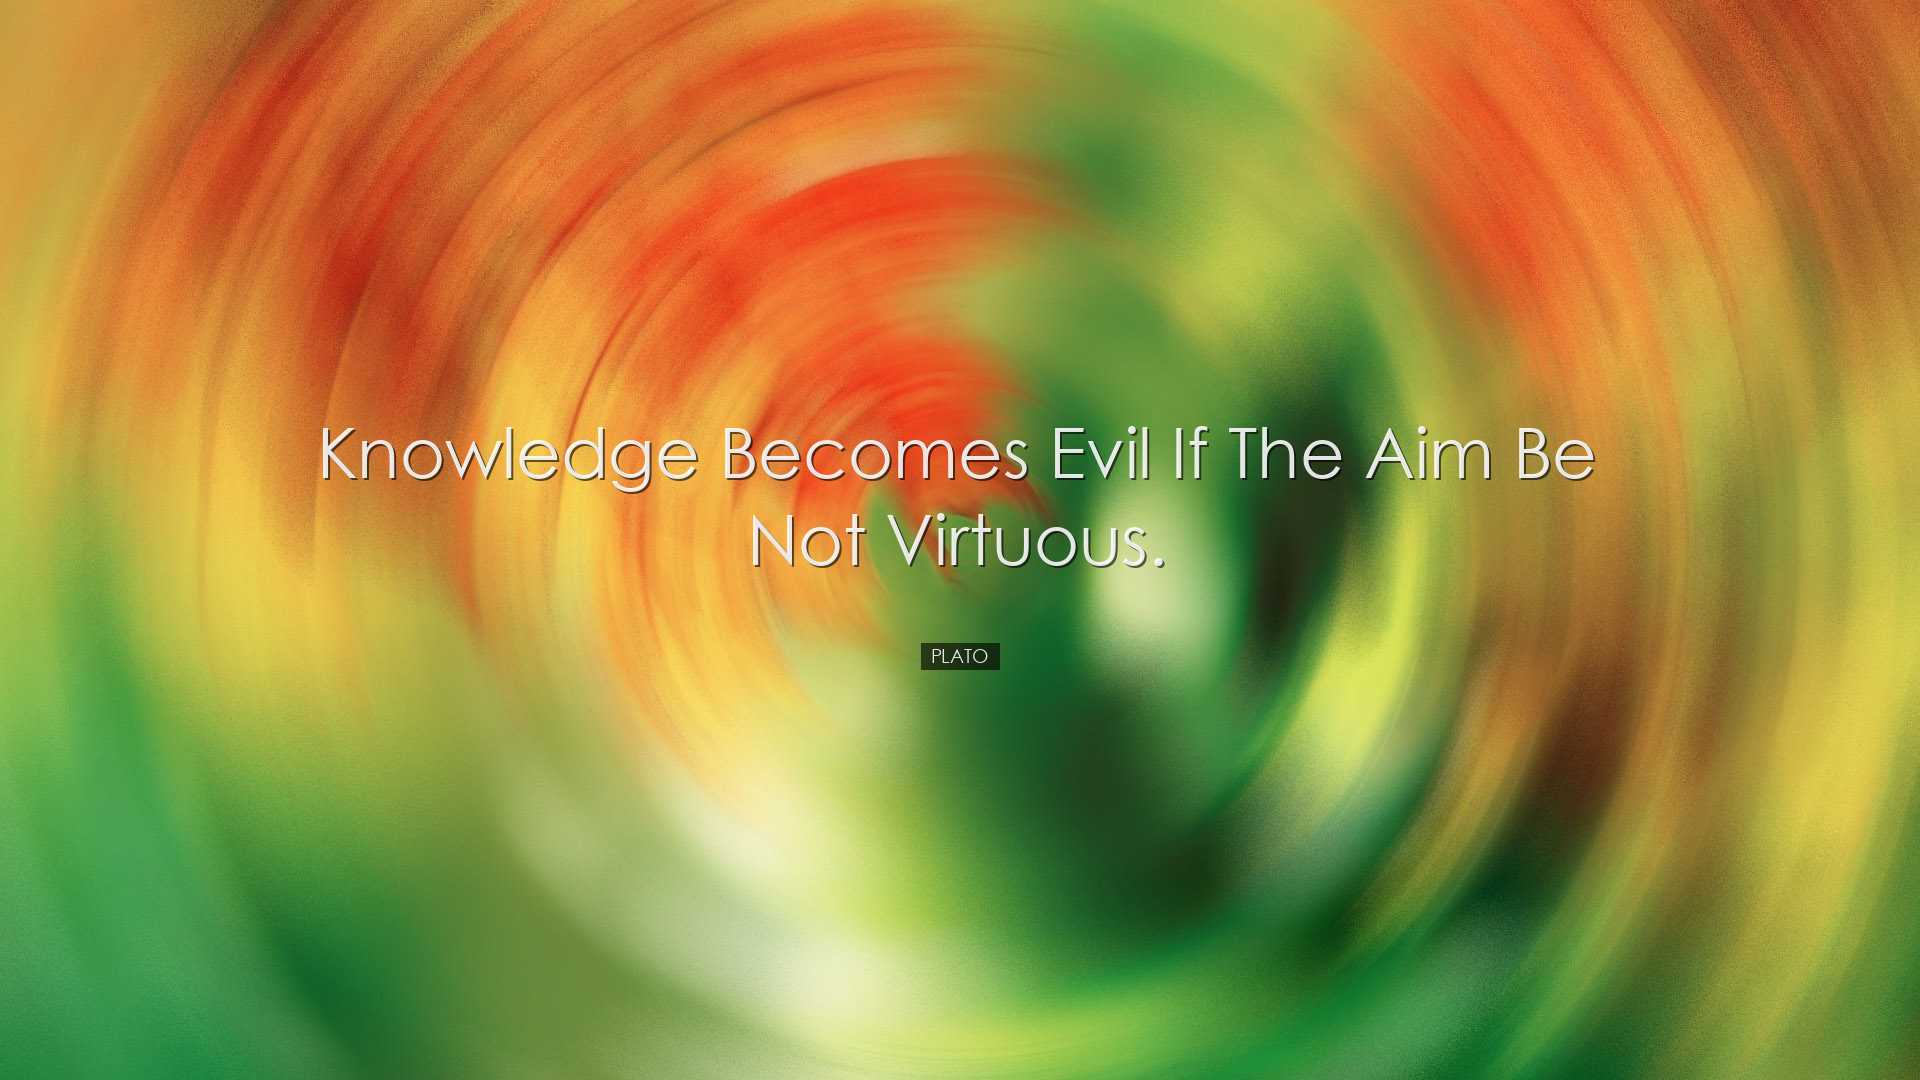 Knowledge becomes evil if the aim be not virtuous. - Plato